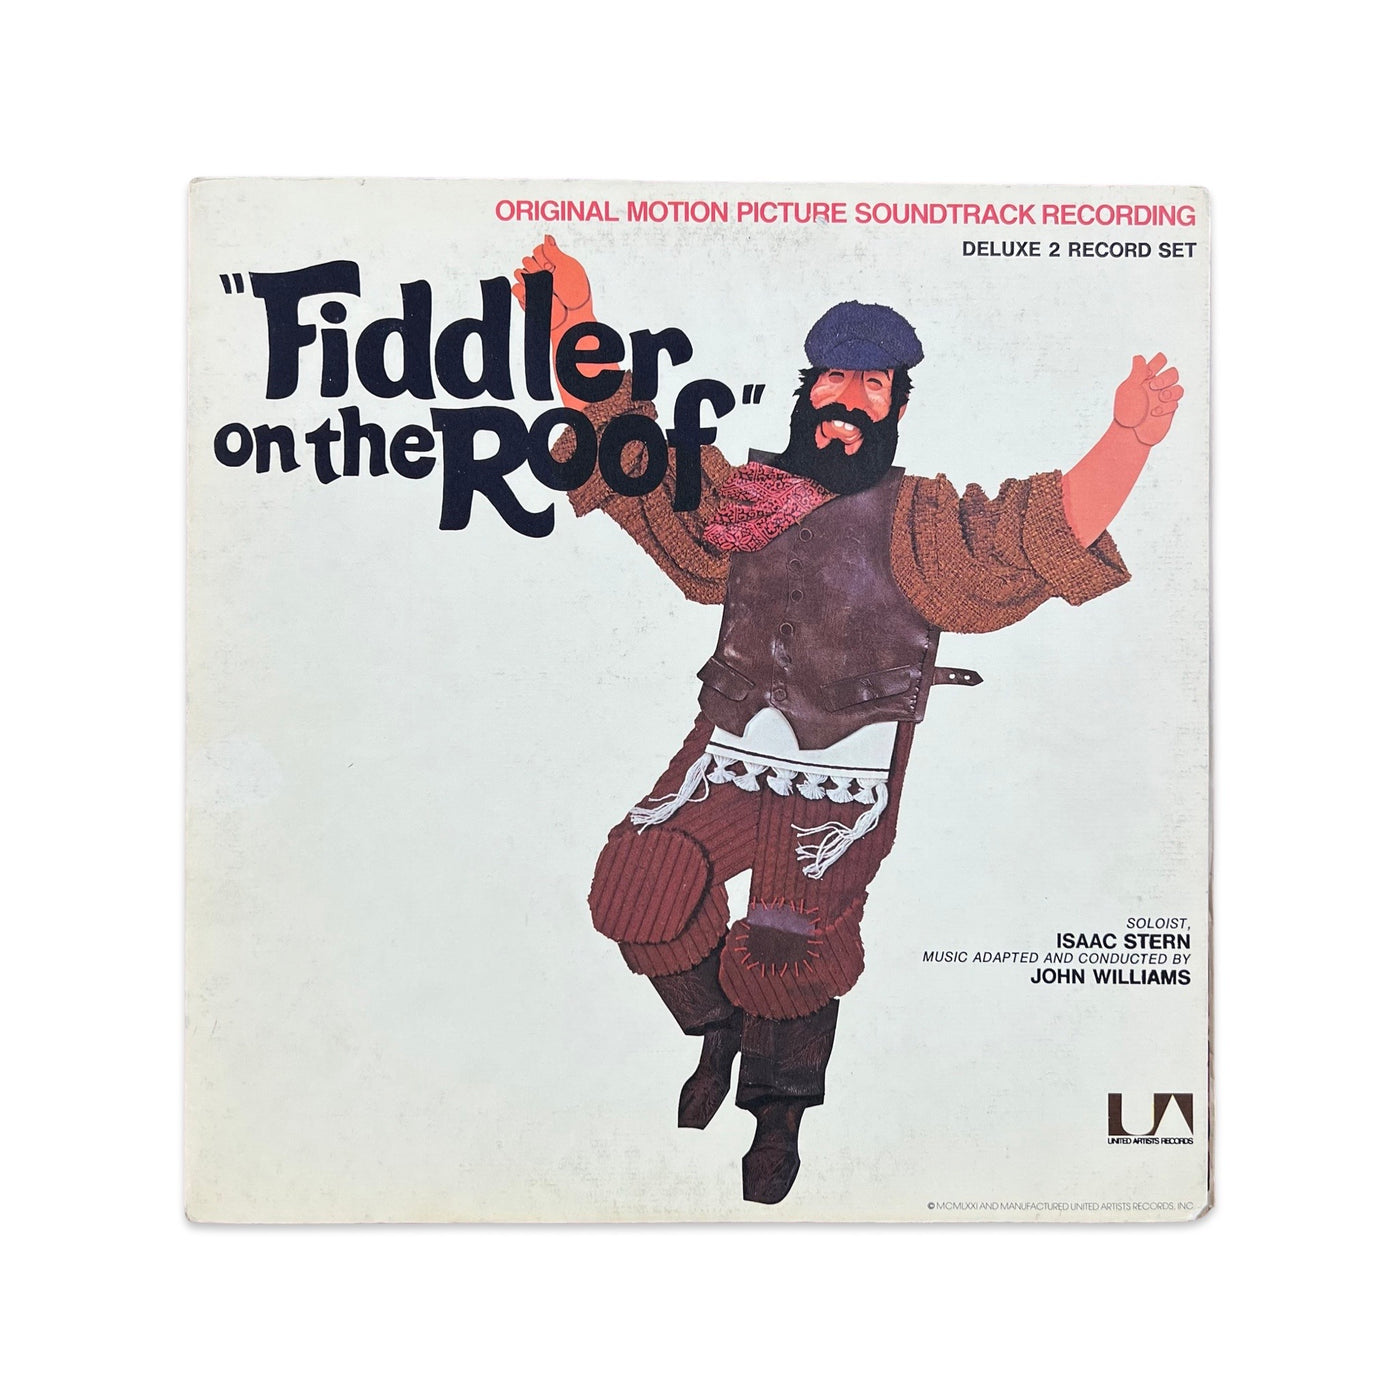 John Williams, Isaac Stern - Fiddler On The Roof (Original Motion Picture Soundtrack Recording)